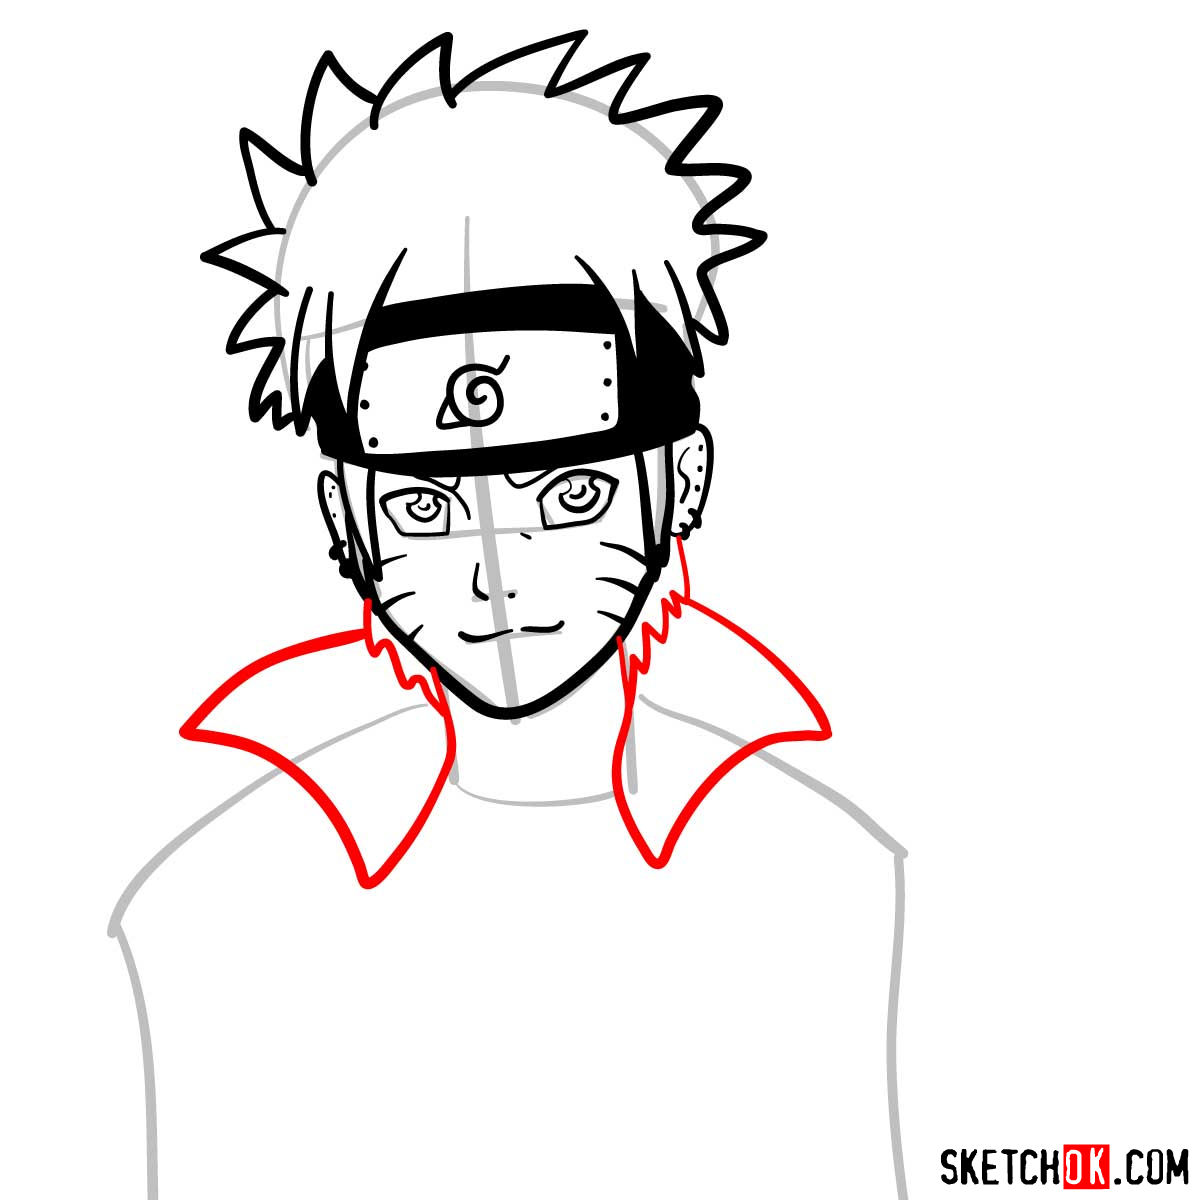 How to draw Naruto's face - Sketchok easy drawing guides